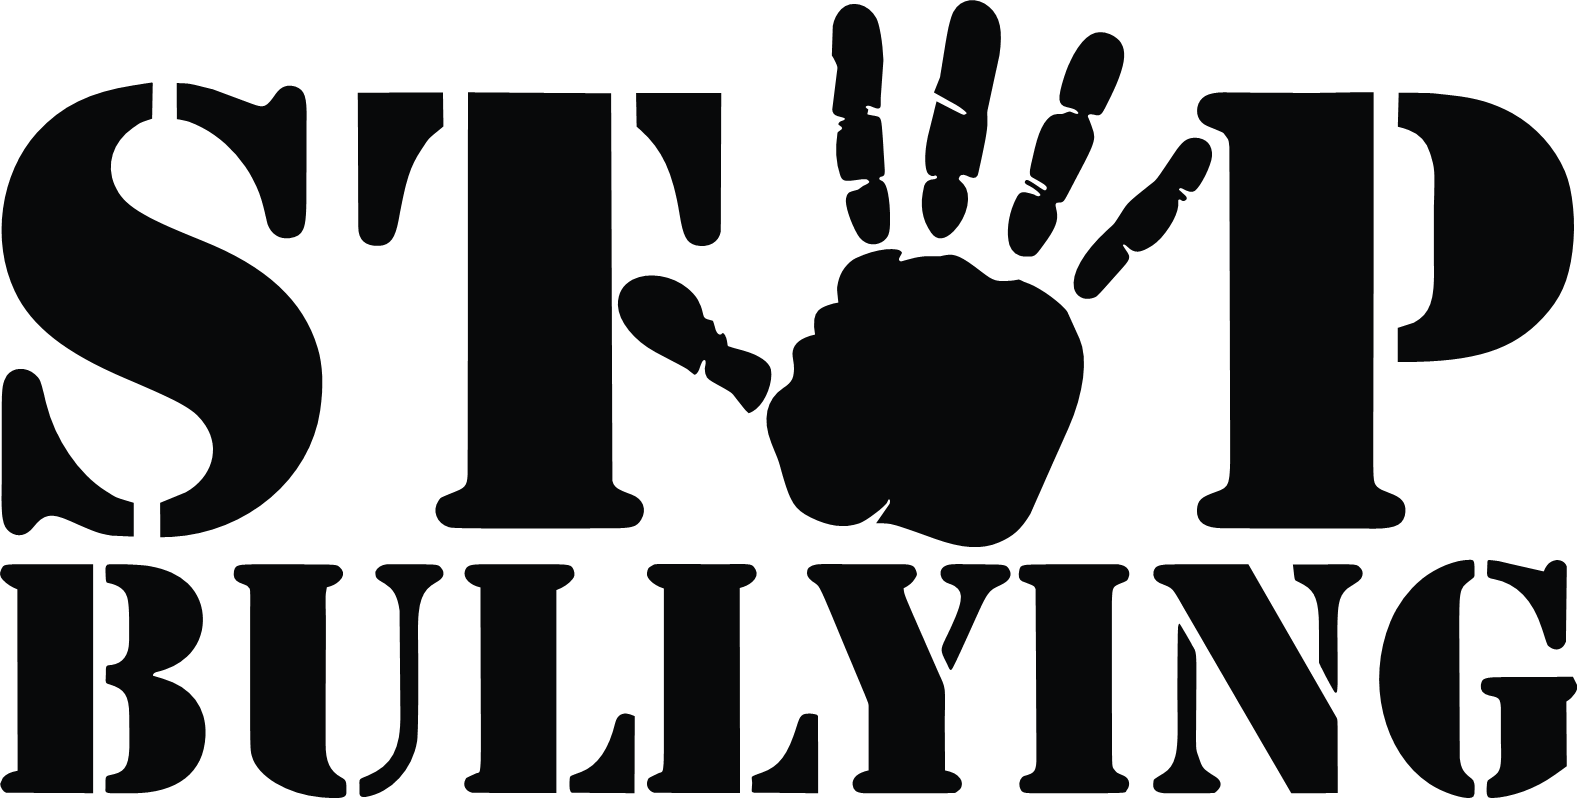 Stop Bullying Hand Text Vinyl Decal Sticker